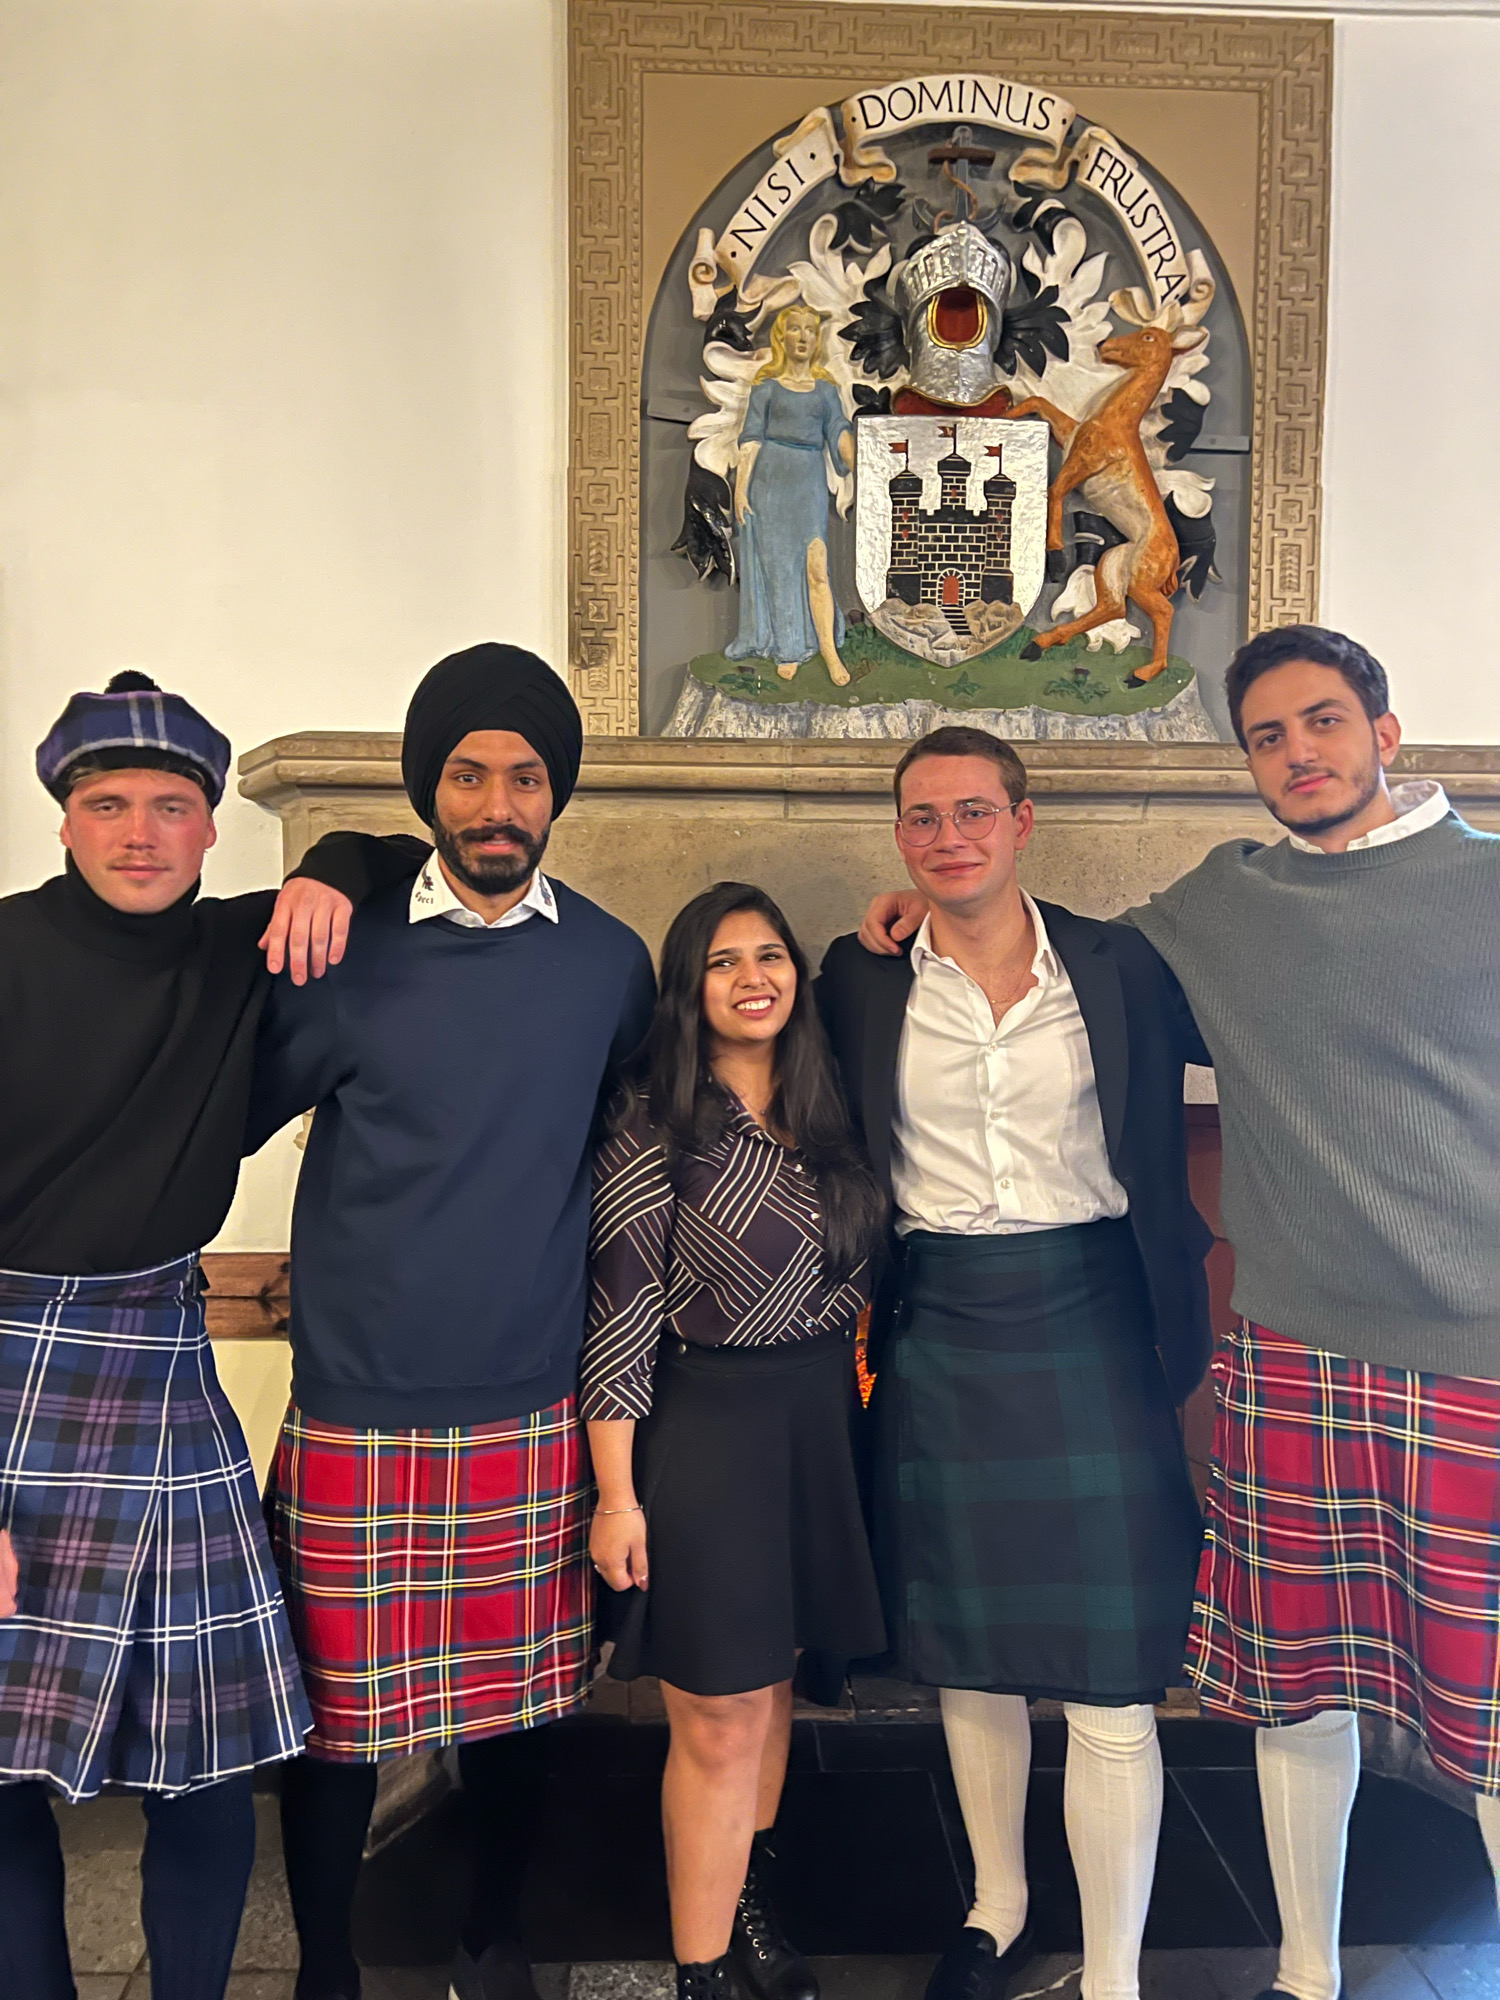 Students gathered in front of the mantelpiece wearing kilts